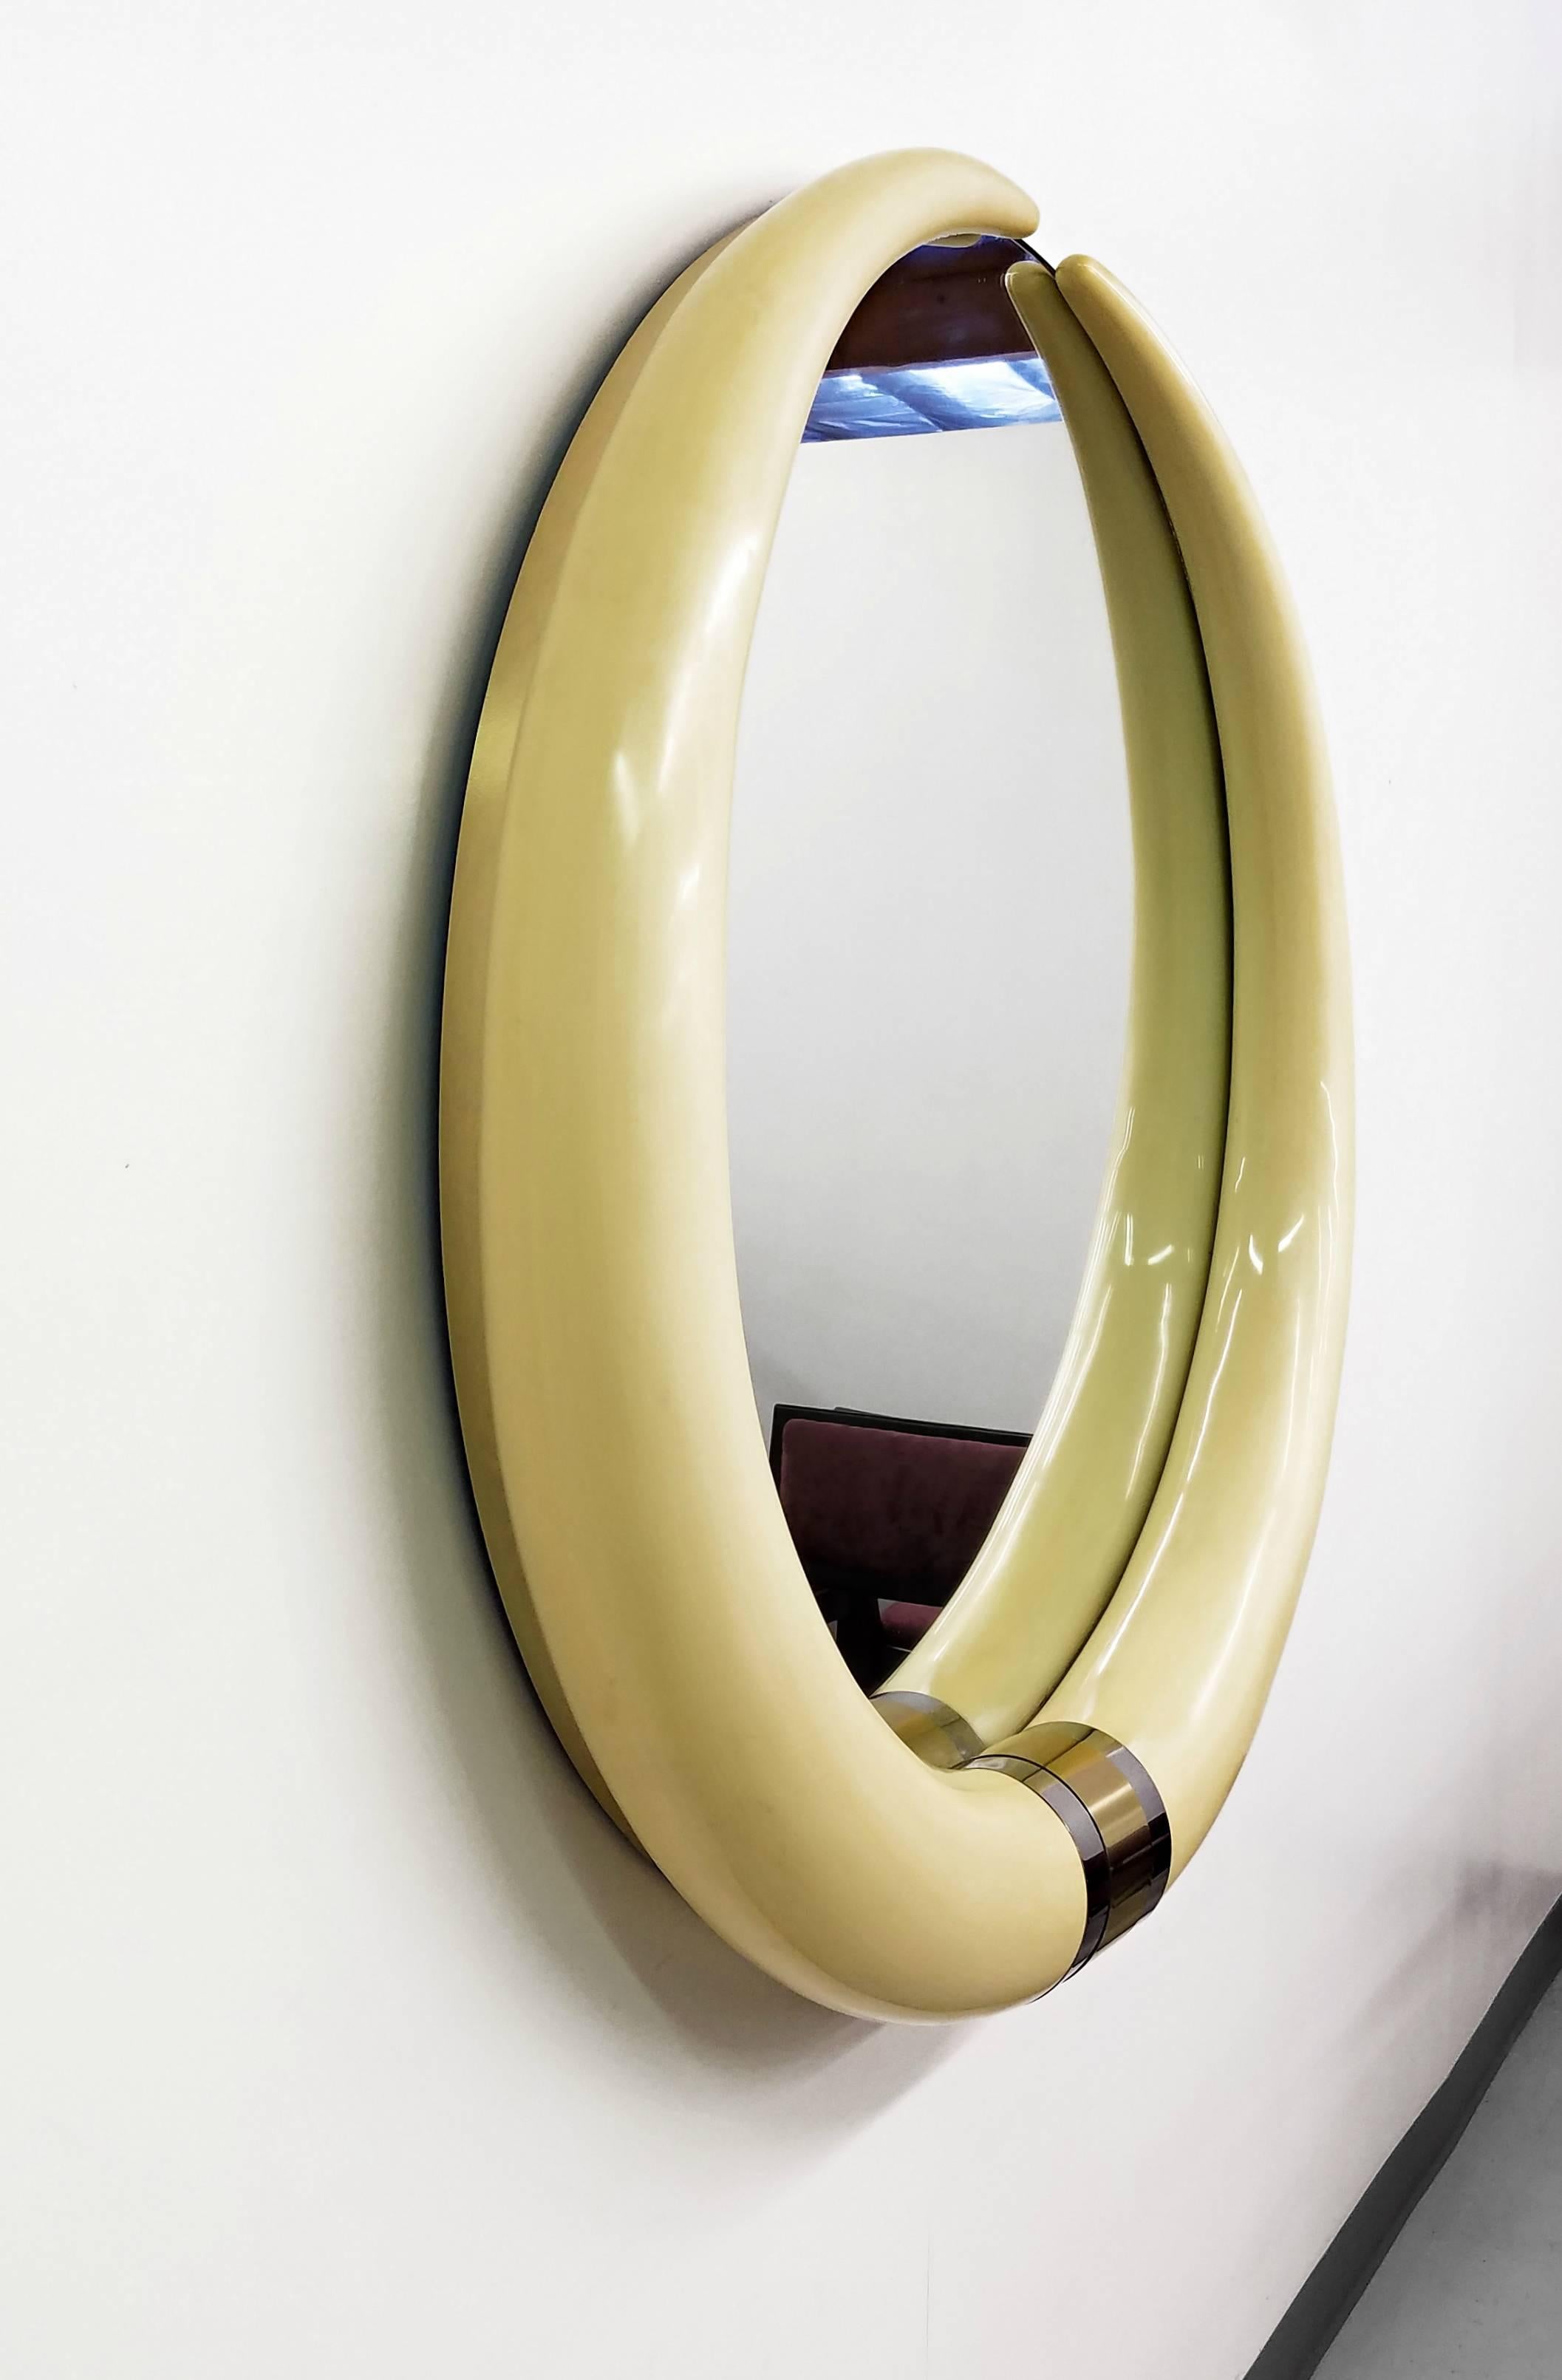 This huge tusk mirror is a real designer masterpiece. It measures in at just under 4ft in diameter, making it the perfect statement piece. Mirror features two faux tusks with a chrome and brass detail at the bottom. Mirror is expertly finished with